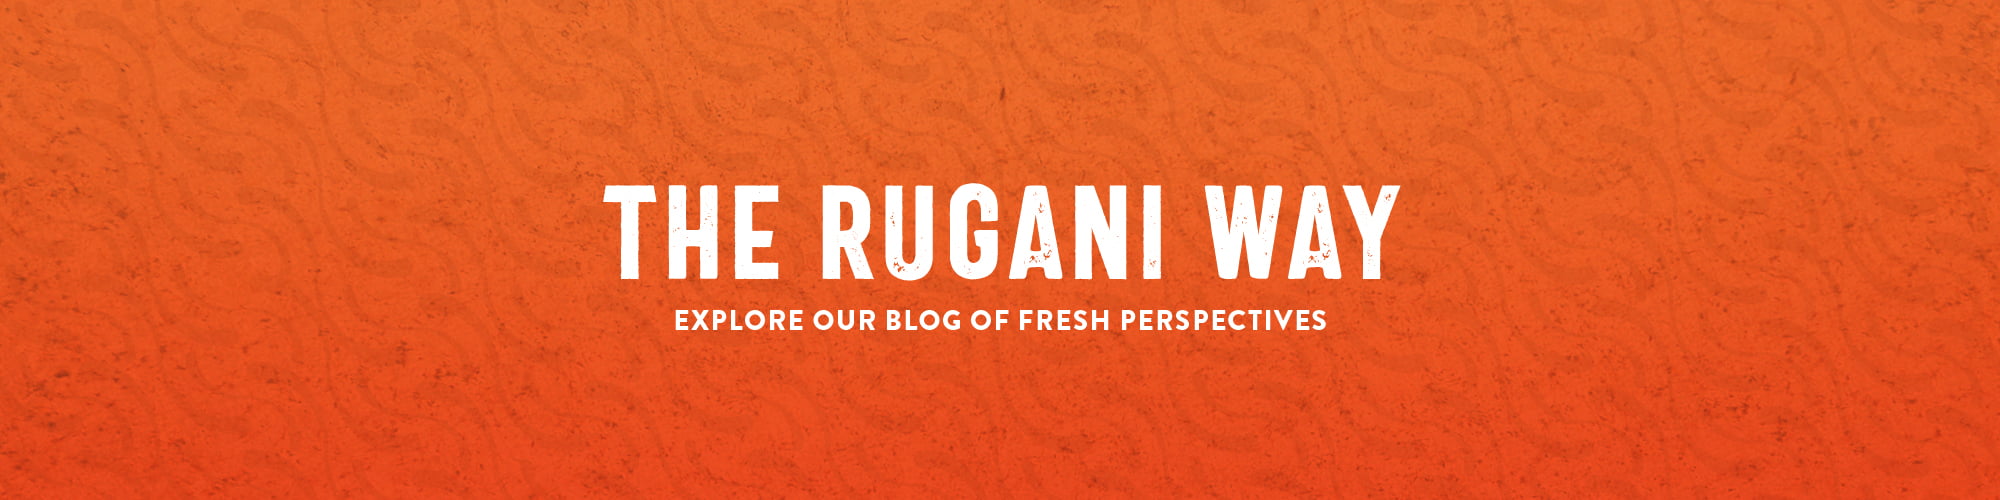 rugani-our-blog-page